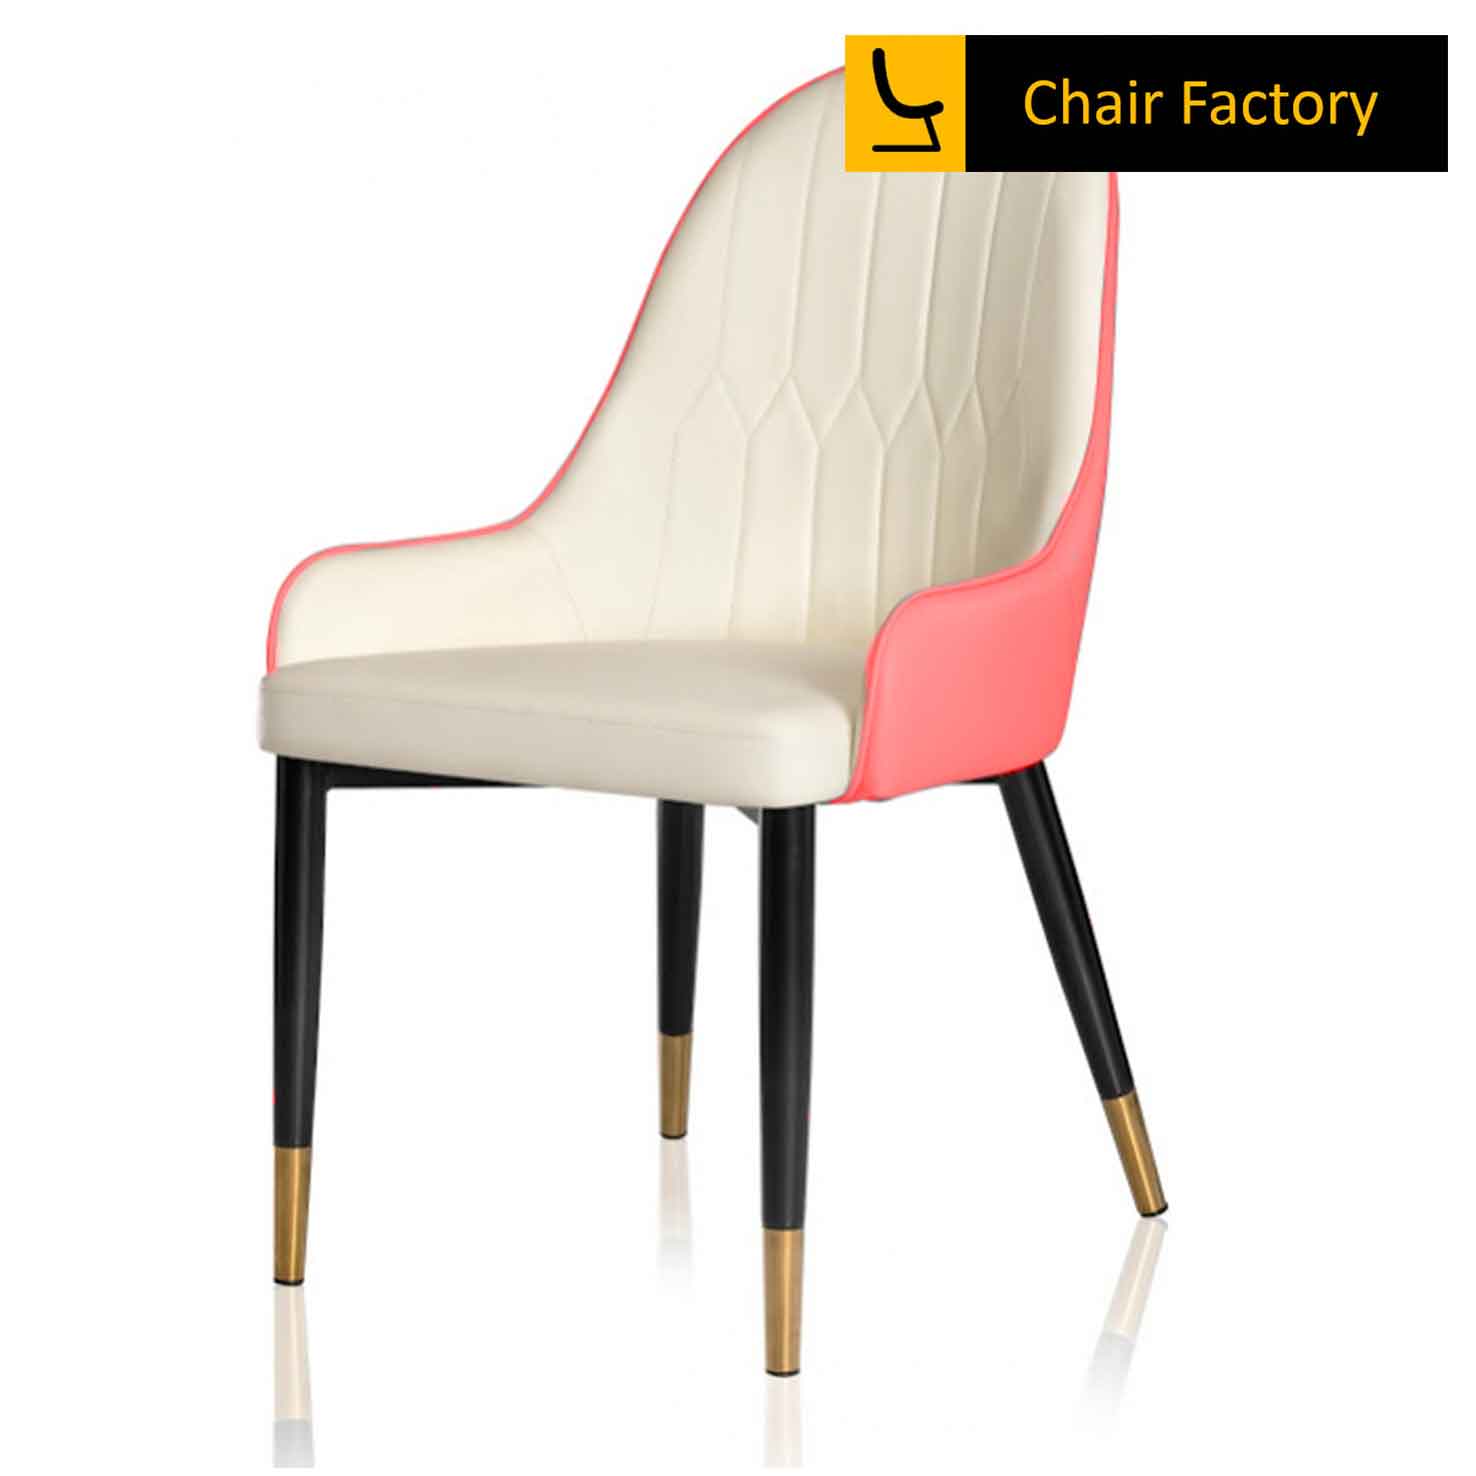 staden red  dining chair